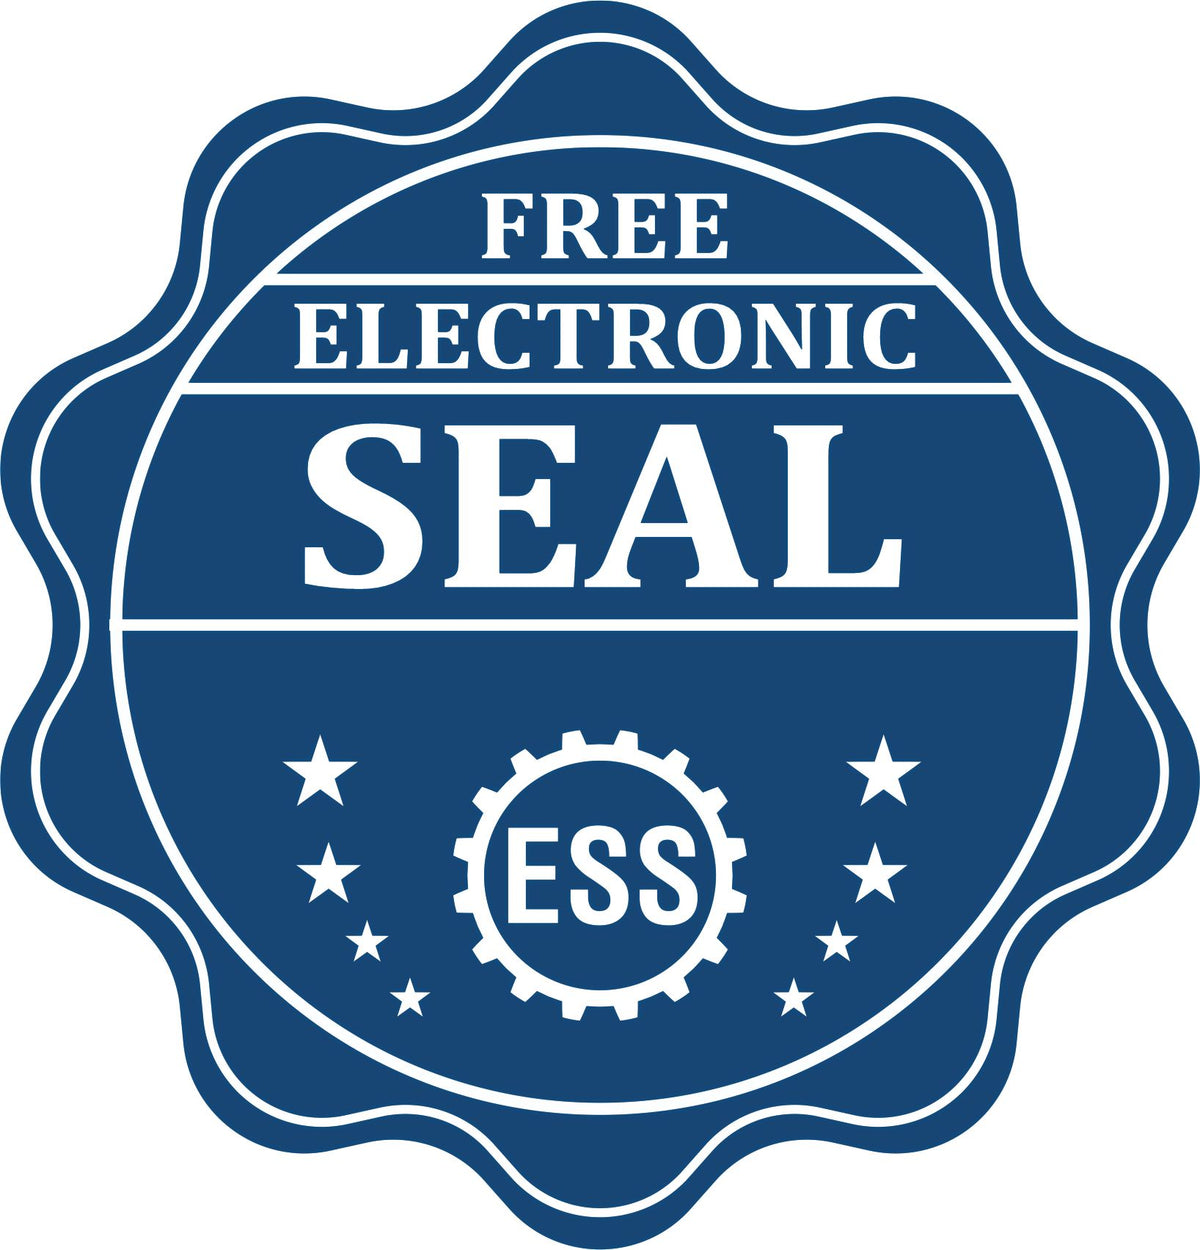 A badge showing a free electronic seal for the Premium MaxLight Pre-Inked Mississippi Landscape Architectural Stamp with stars and the ESS gear on the emblem.